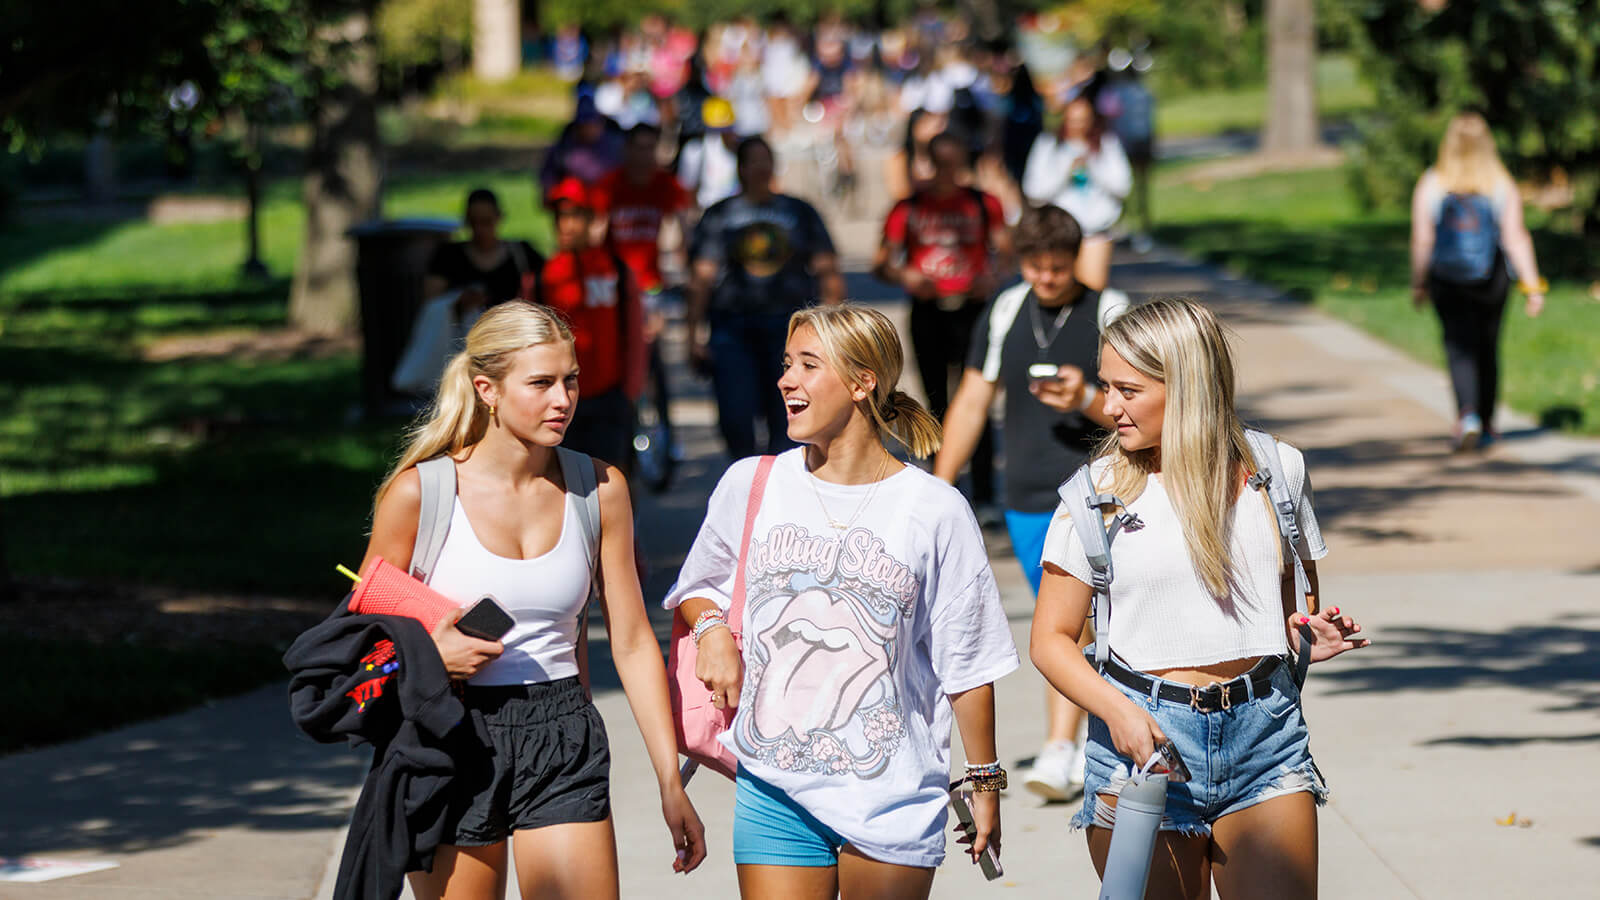 Students walking together on path during sunny day